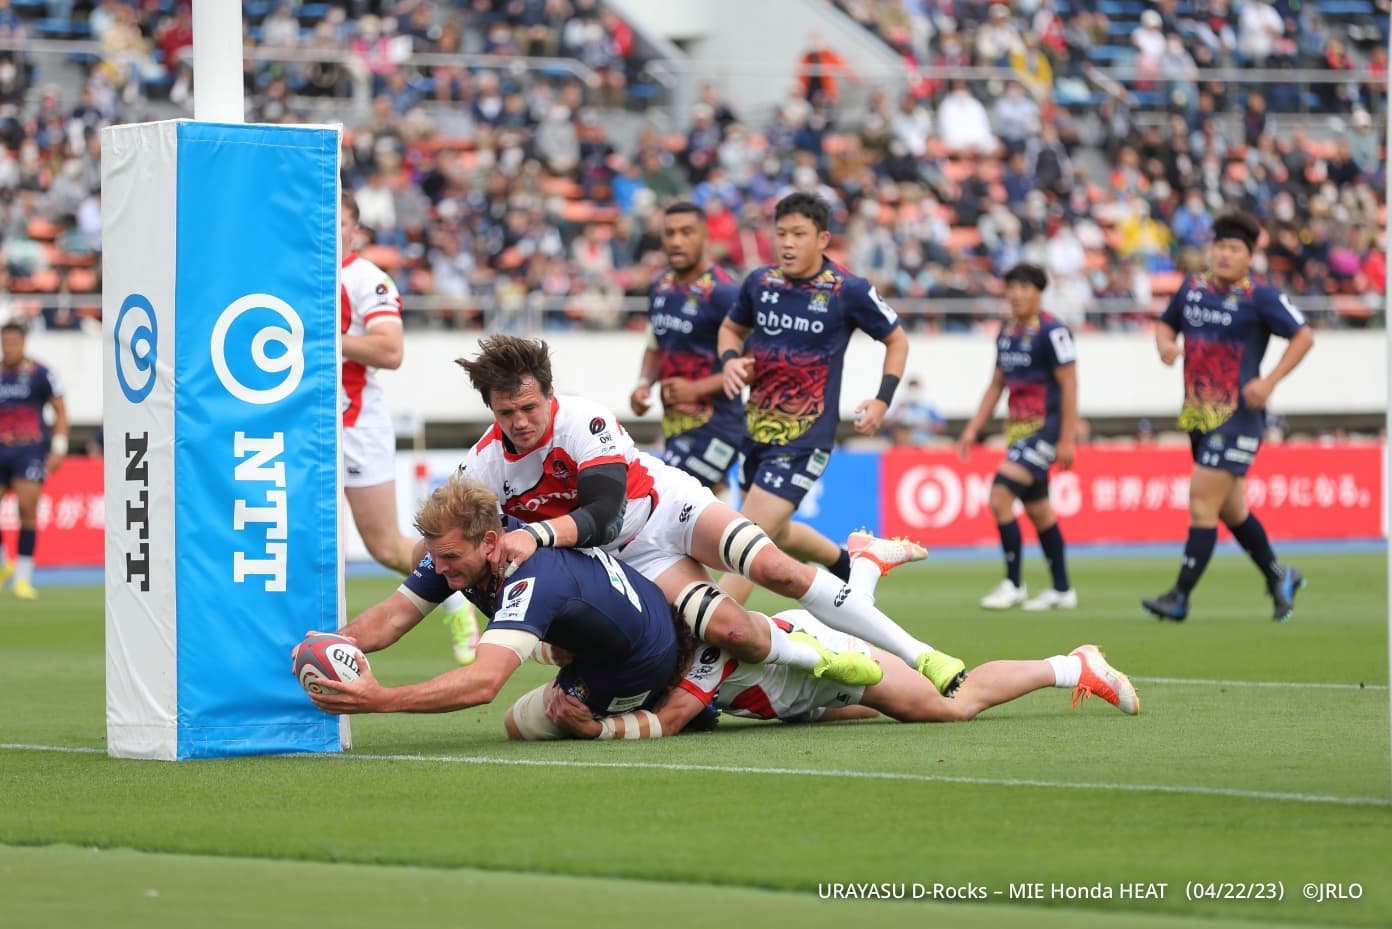 Photo of the moment when the player makes a try